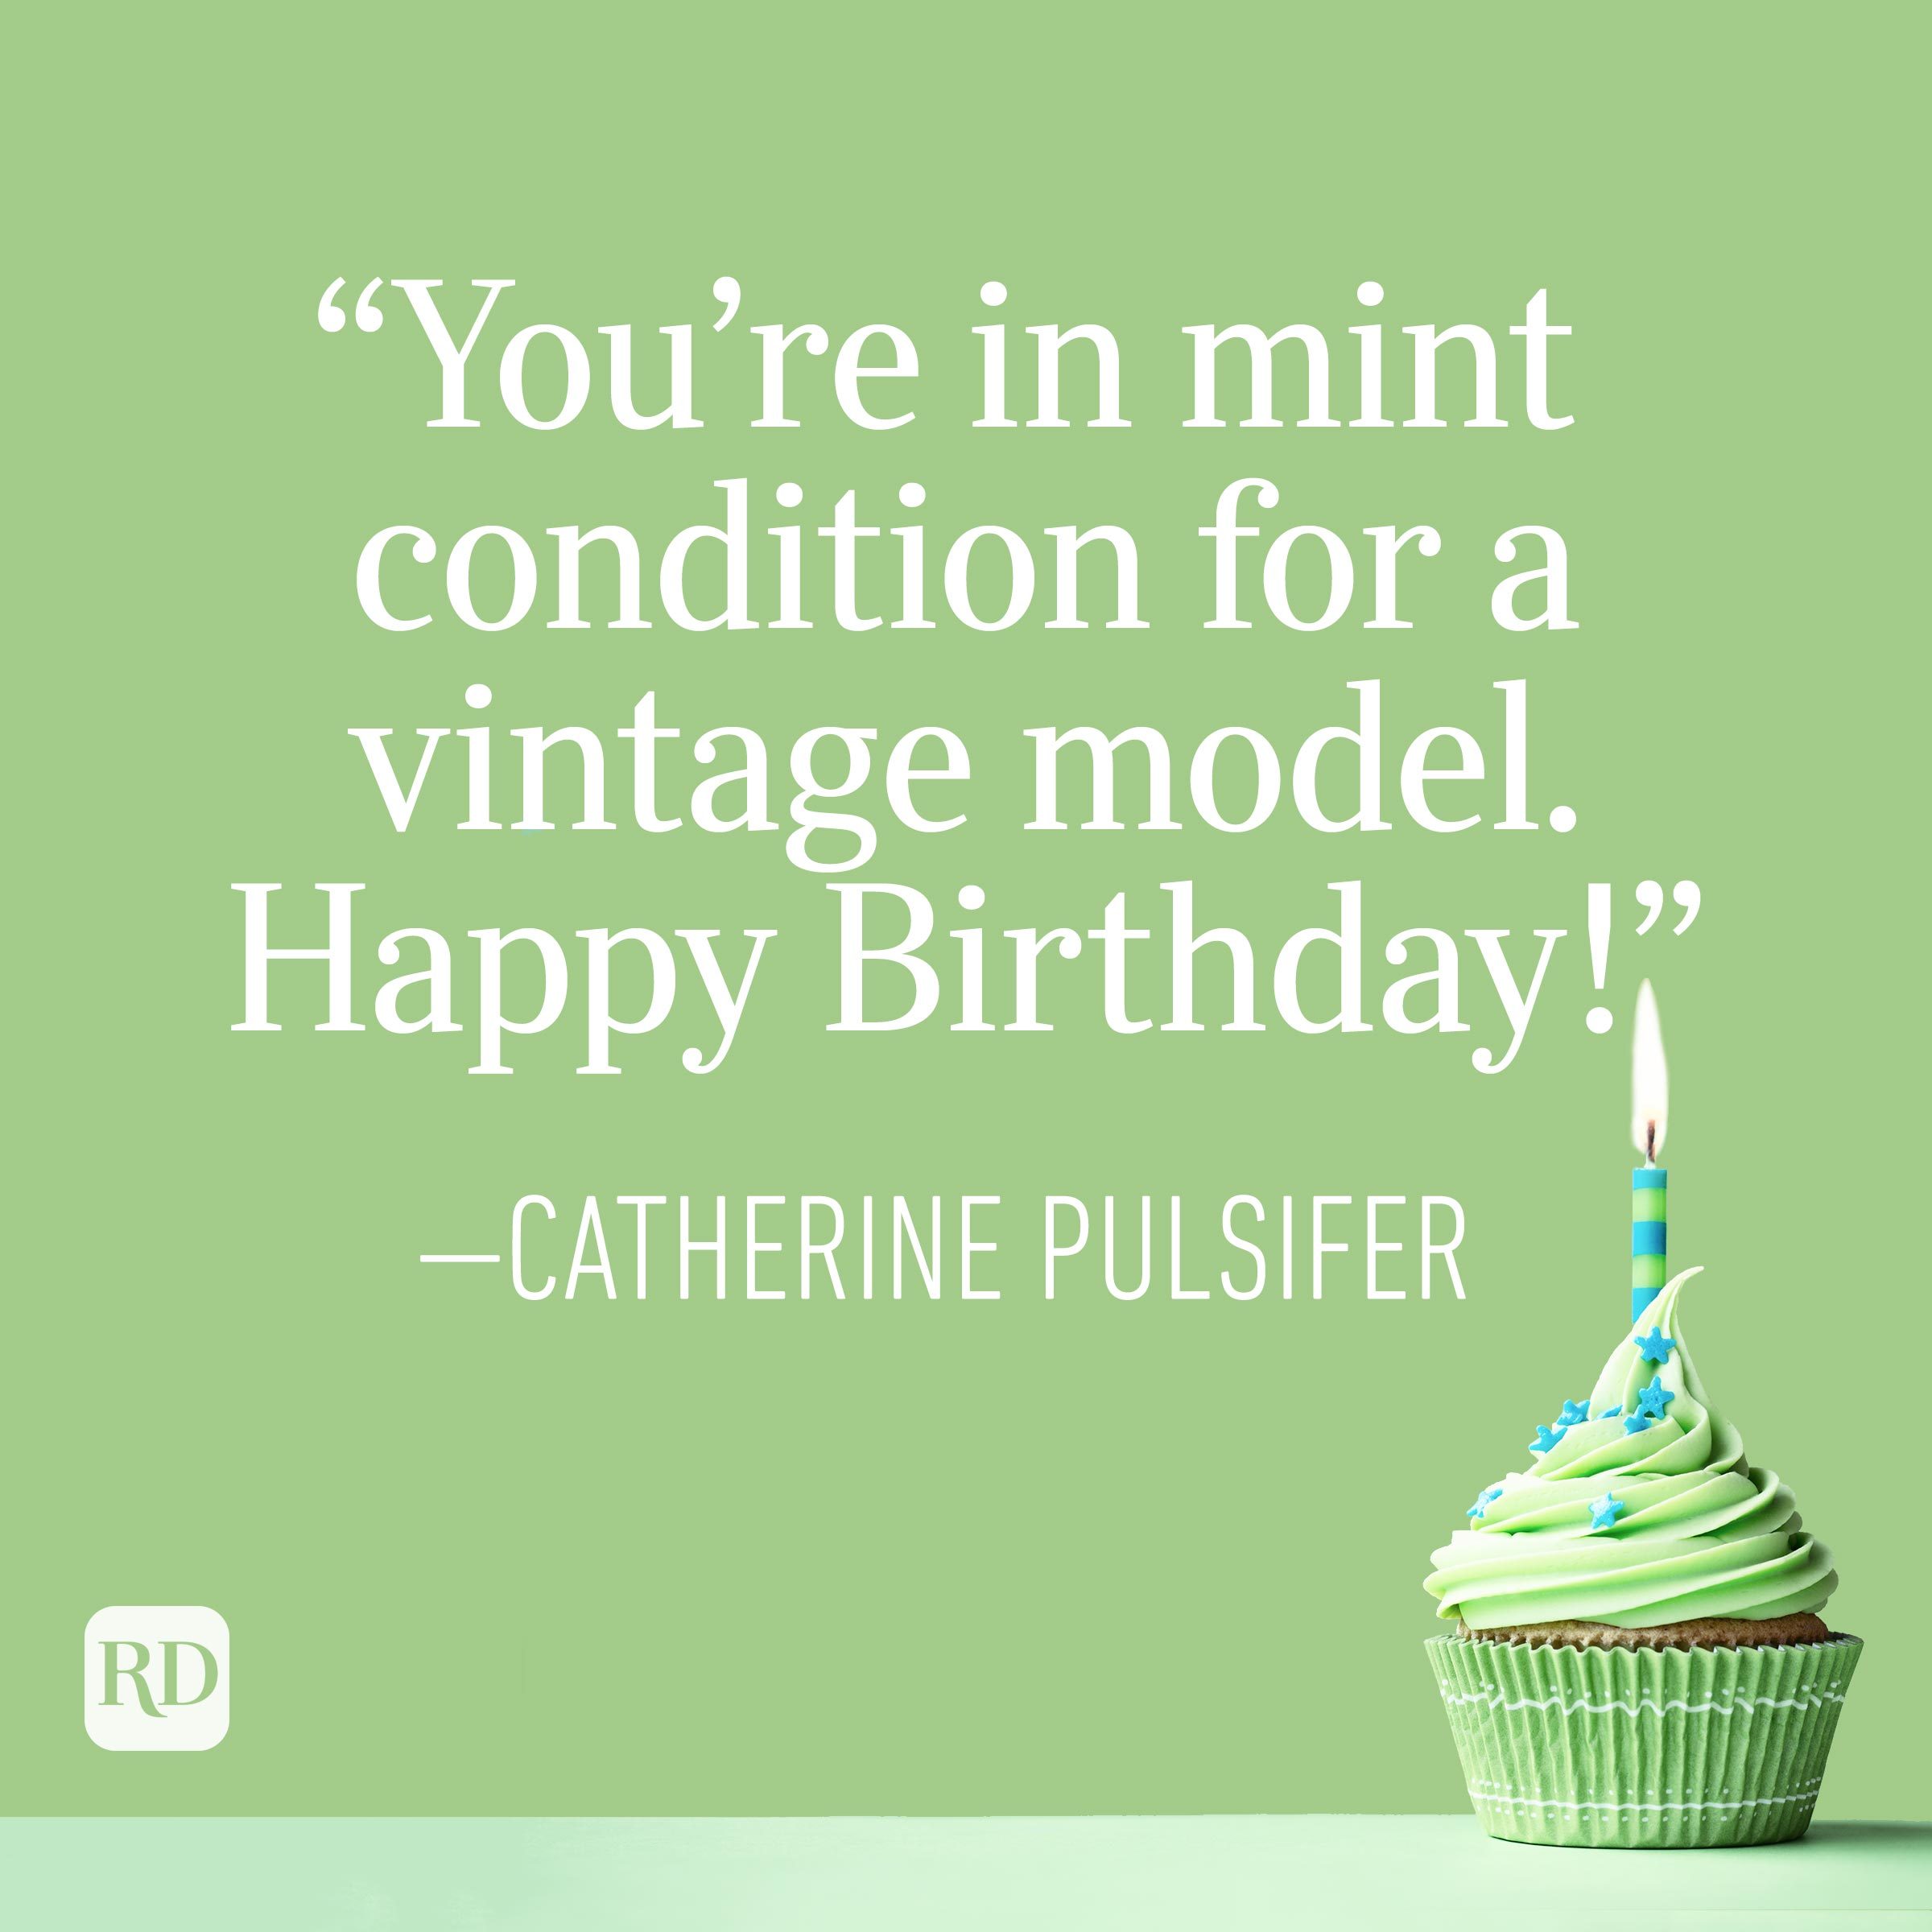 "You're in mint condition for a vintage model. Happy Birthday!" —Catherine Pulsifer